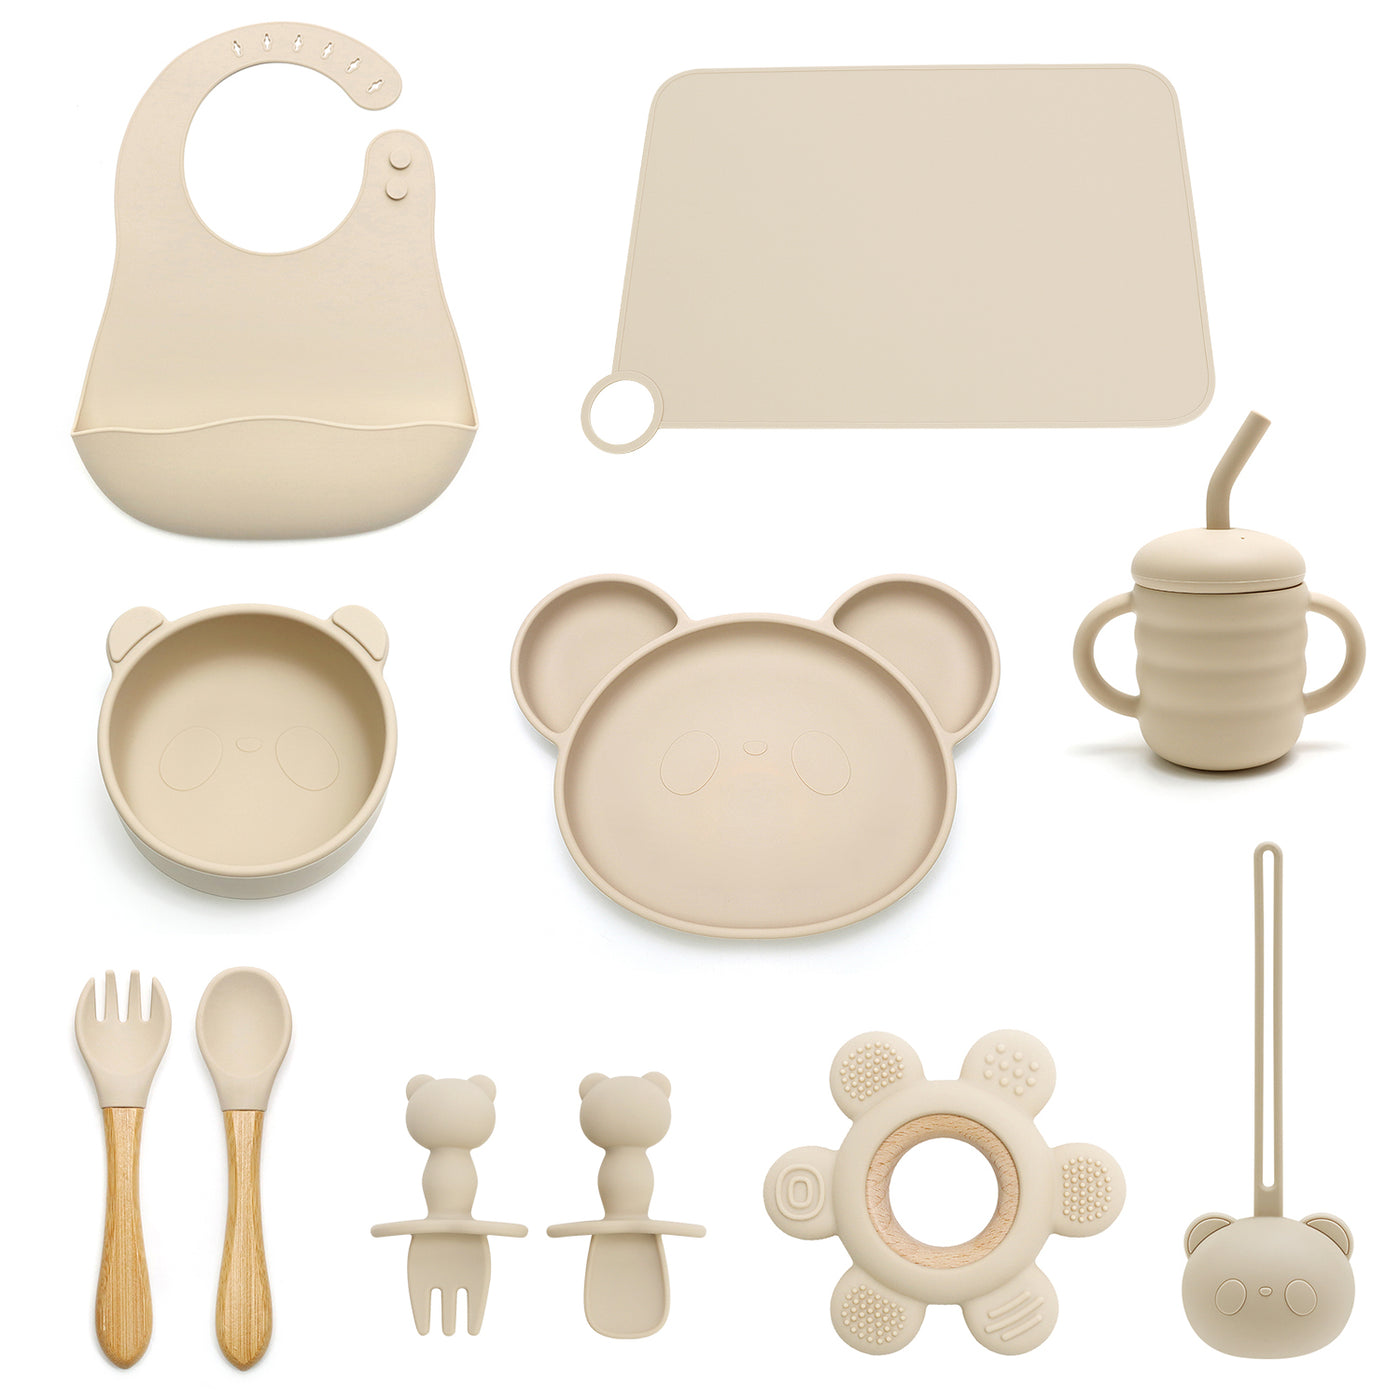 TAUPE 11 PIECE SILICONE BABY AND TODDLER NON-SLIP SUCTION CUP FEEDING SET